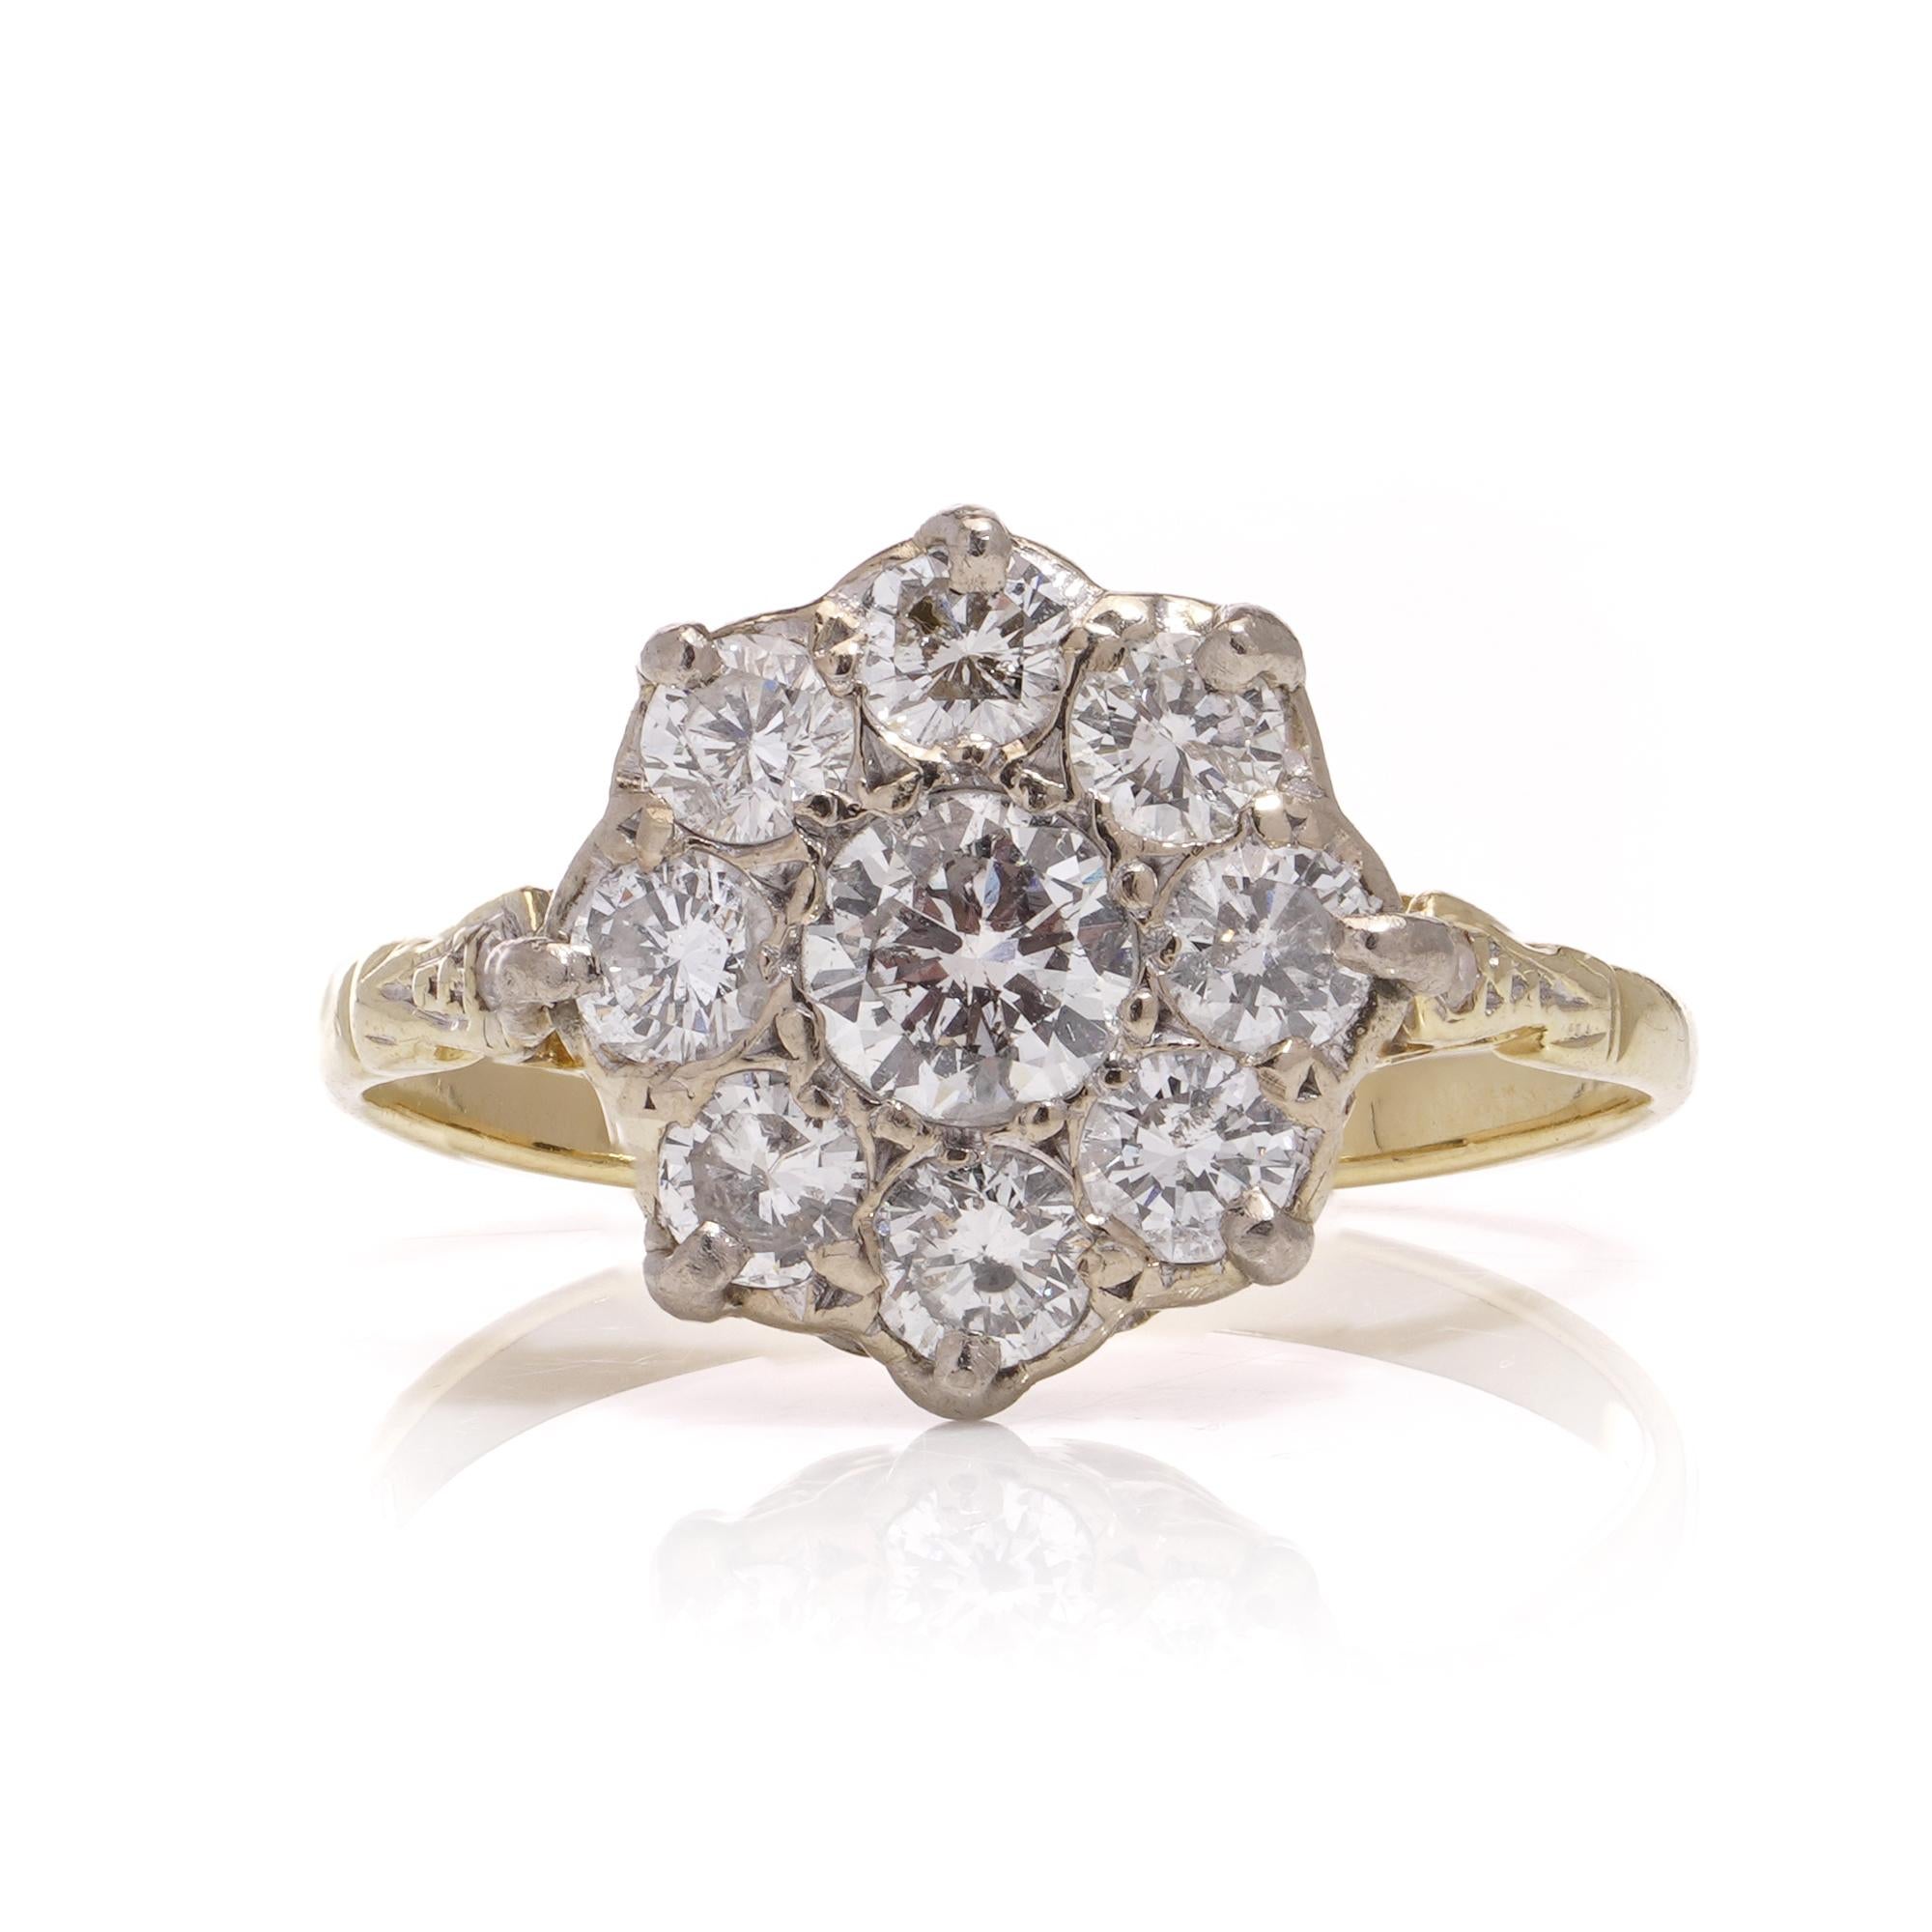 This exquisite Edwardian ring boasts an 18kt yellow gold daisy flower design, adorned with dazzling diamonds. At its heart, a brilliant round cut diamond shines, encircled by eight smaller diamonds. The band is elegantly accented with two additional